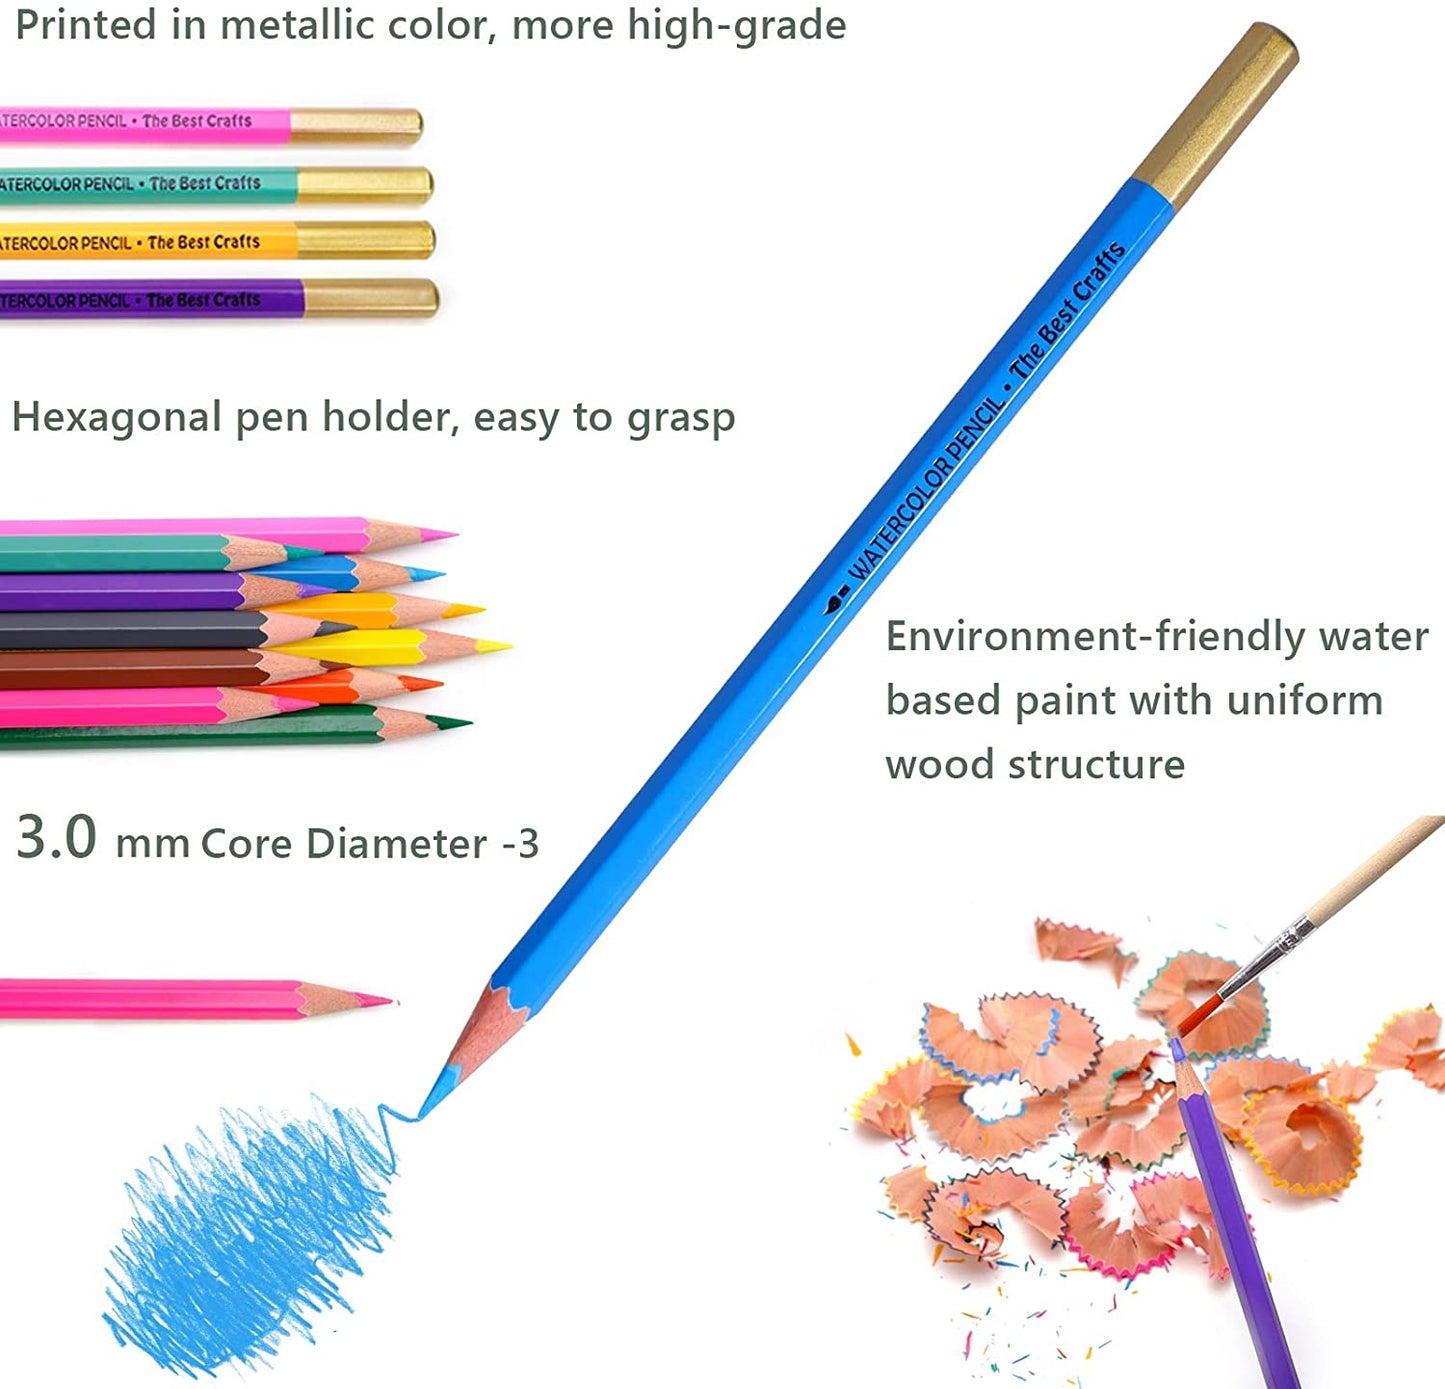 The pencils from the set of 72 TBC professional watercolour pencils are easy to hold, environment friendly, high-grade and have a uniform wood structure - Stationery Island